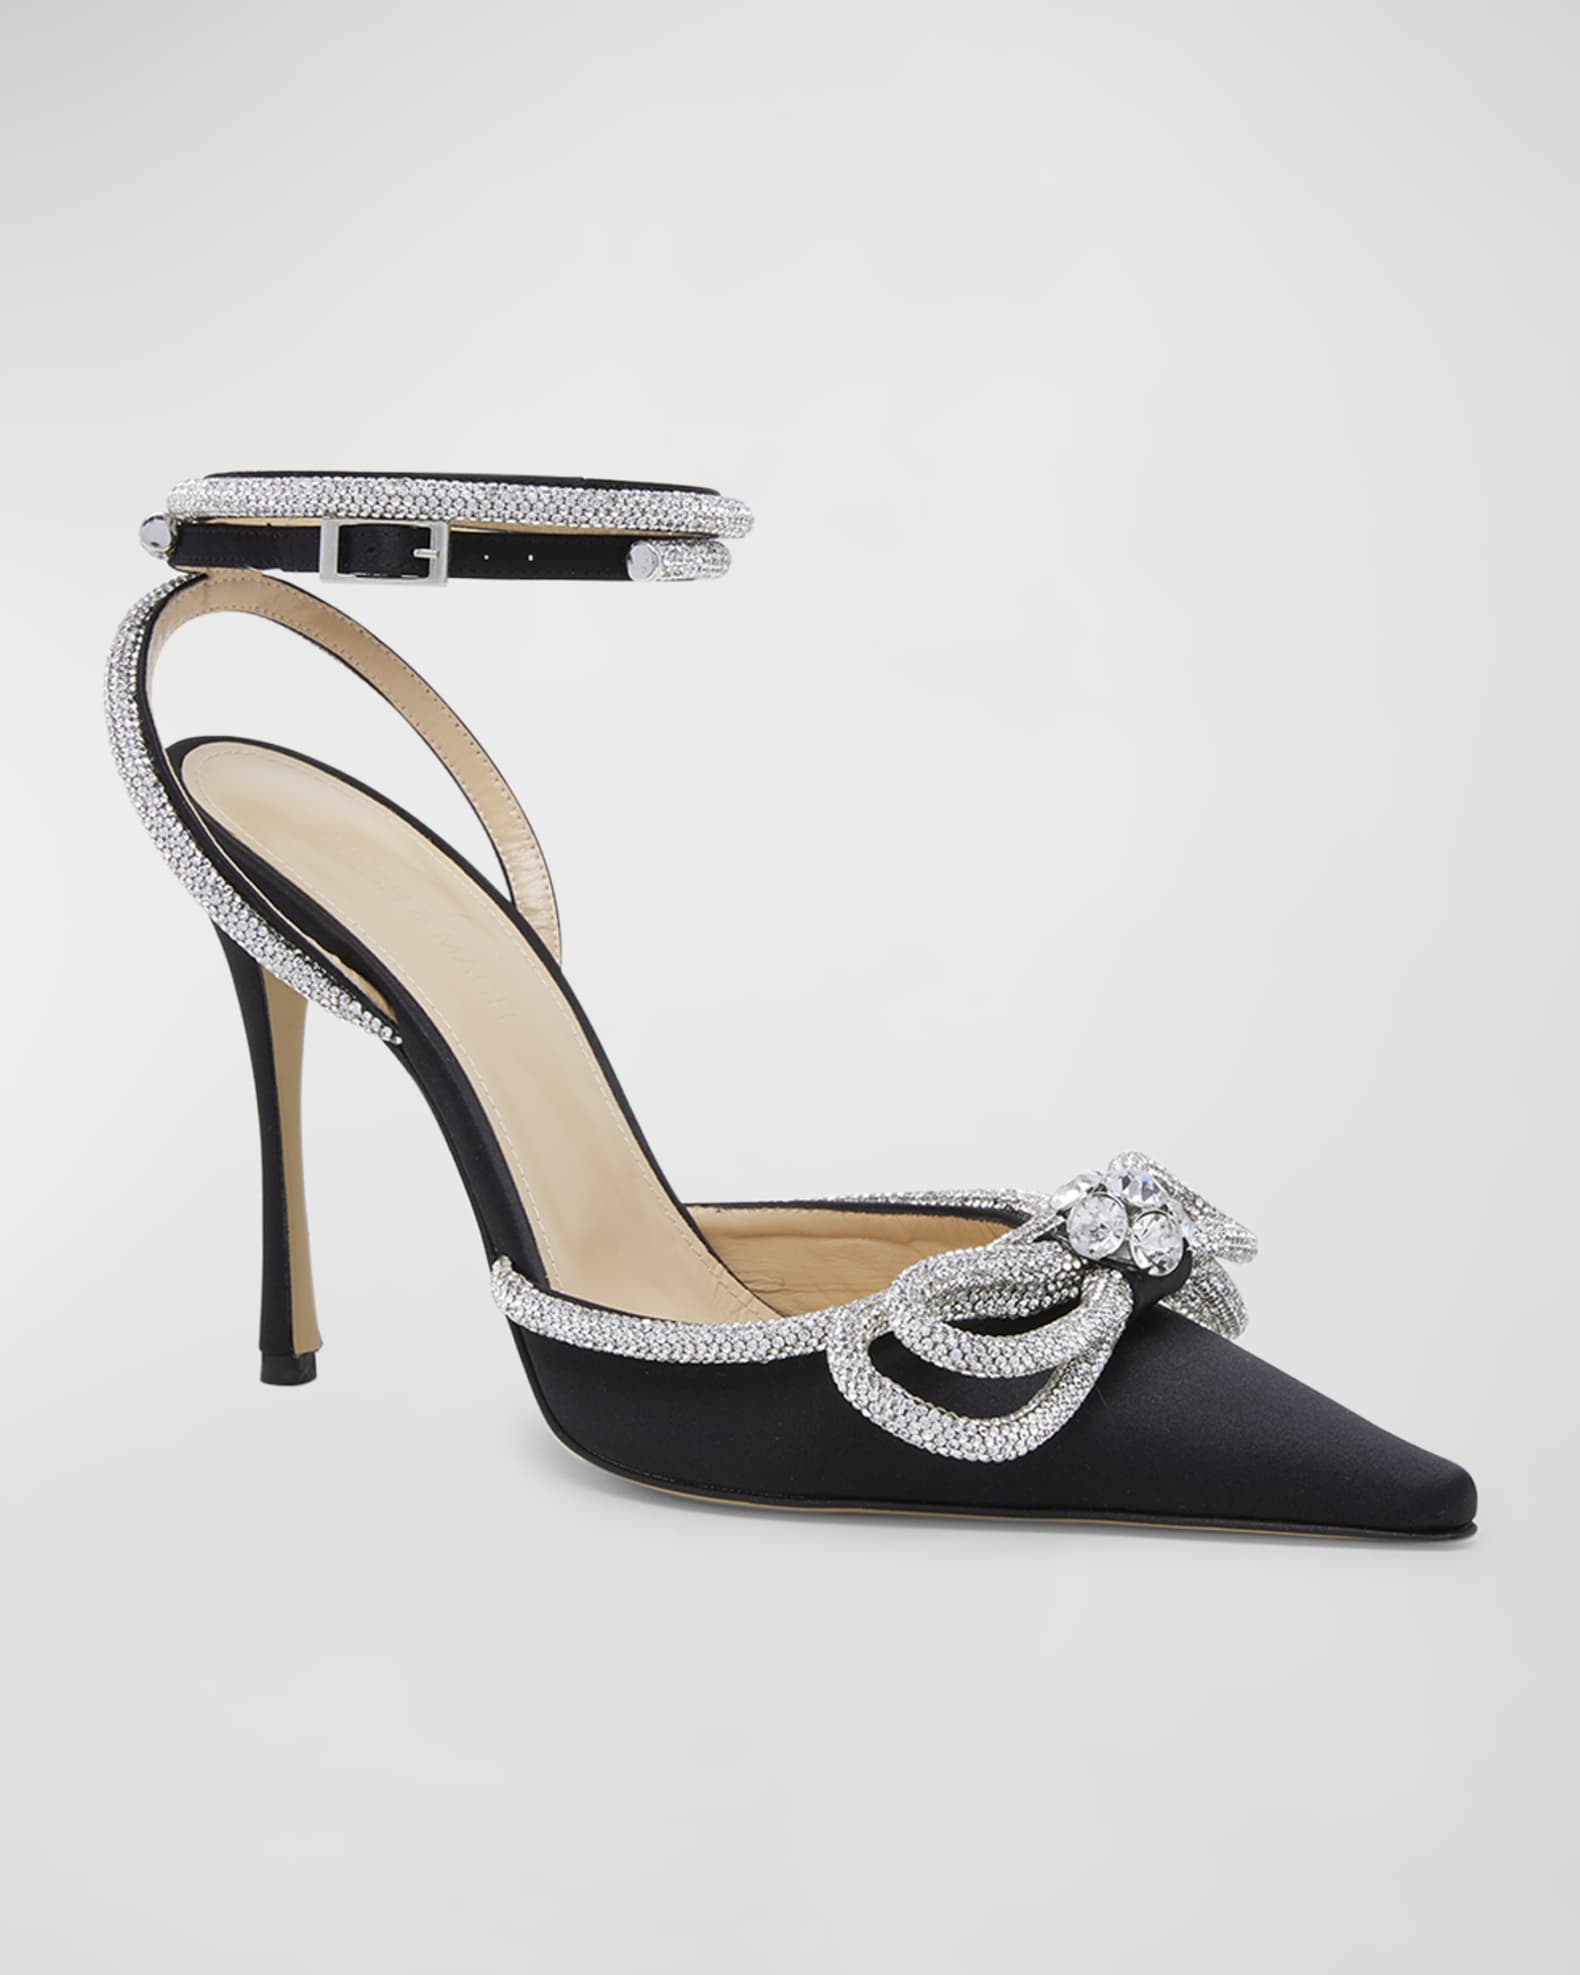 MACH & MACH Strass Bow Double Ankle-Strap Pumps | Neiman Marcus